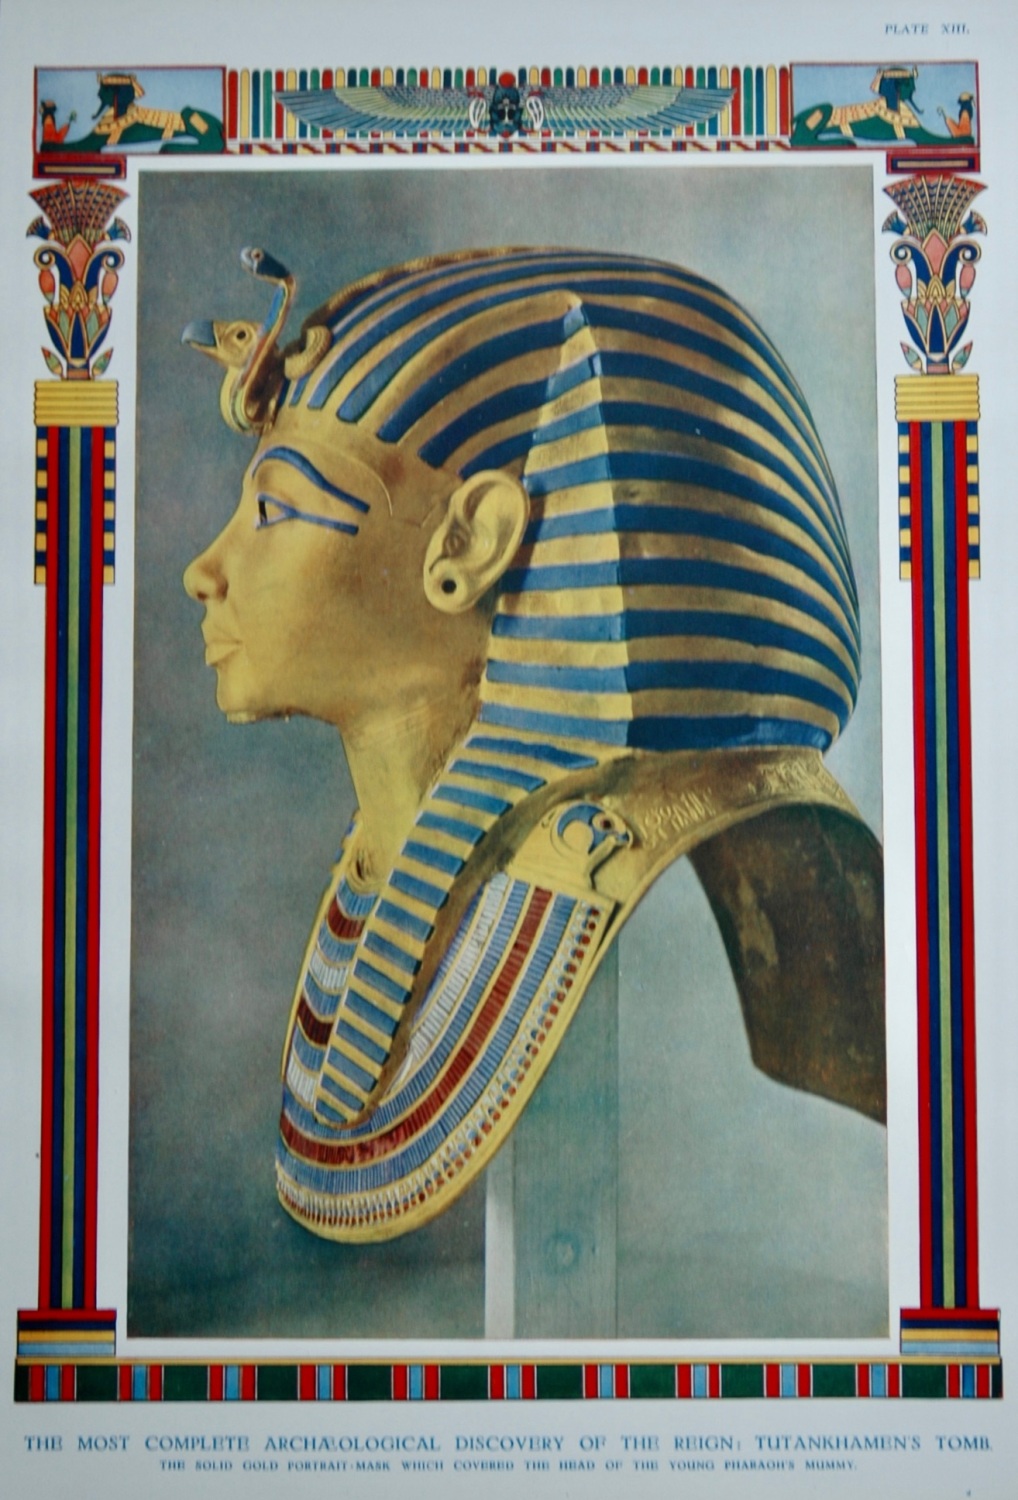 The most Complete Archaeological Discovery of the Reign : Tutankhamen's Tom